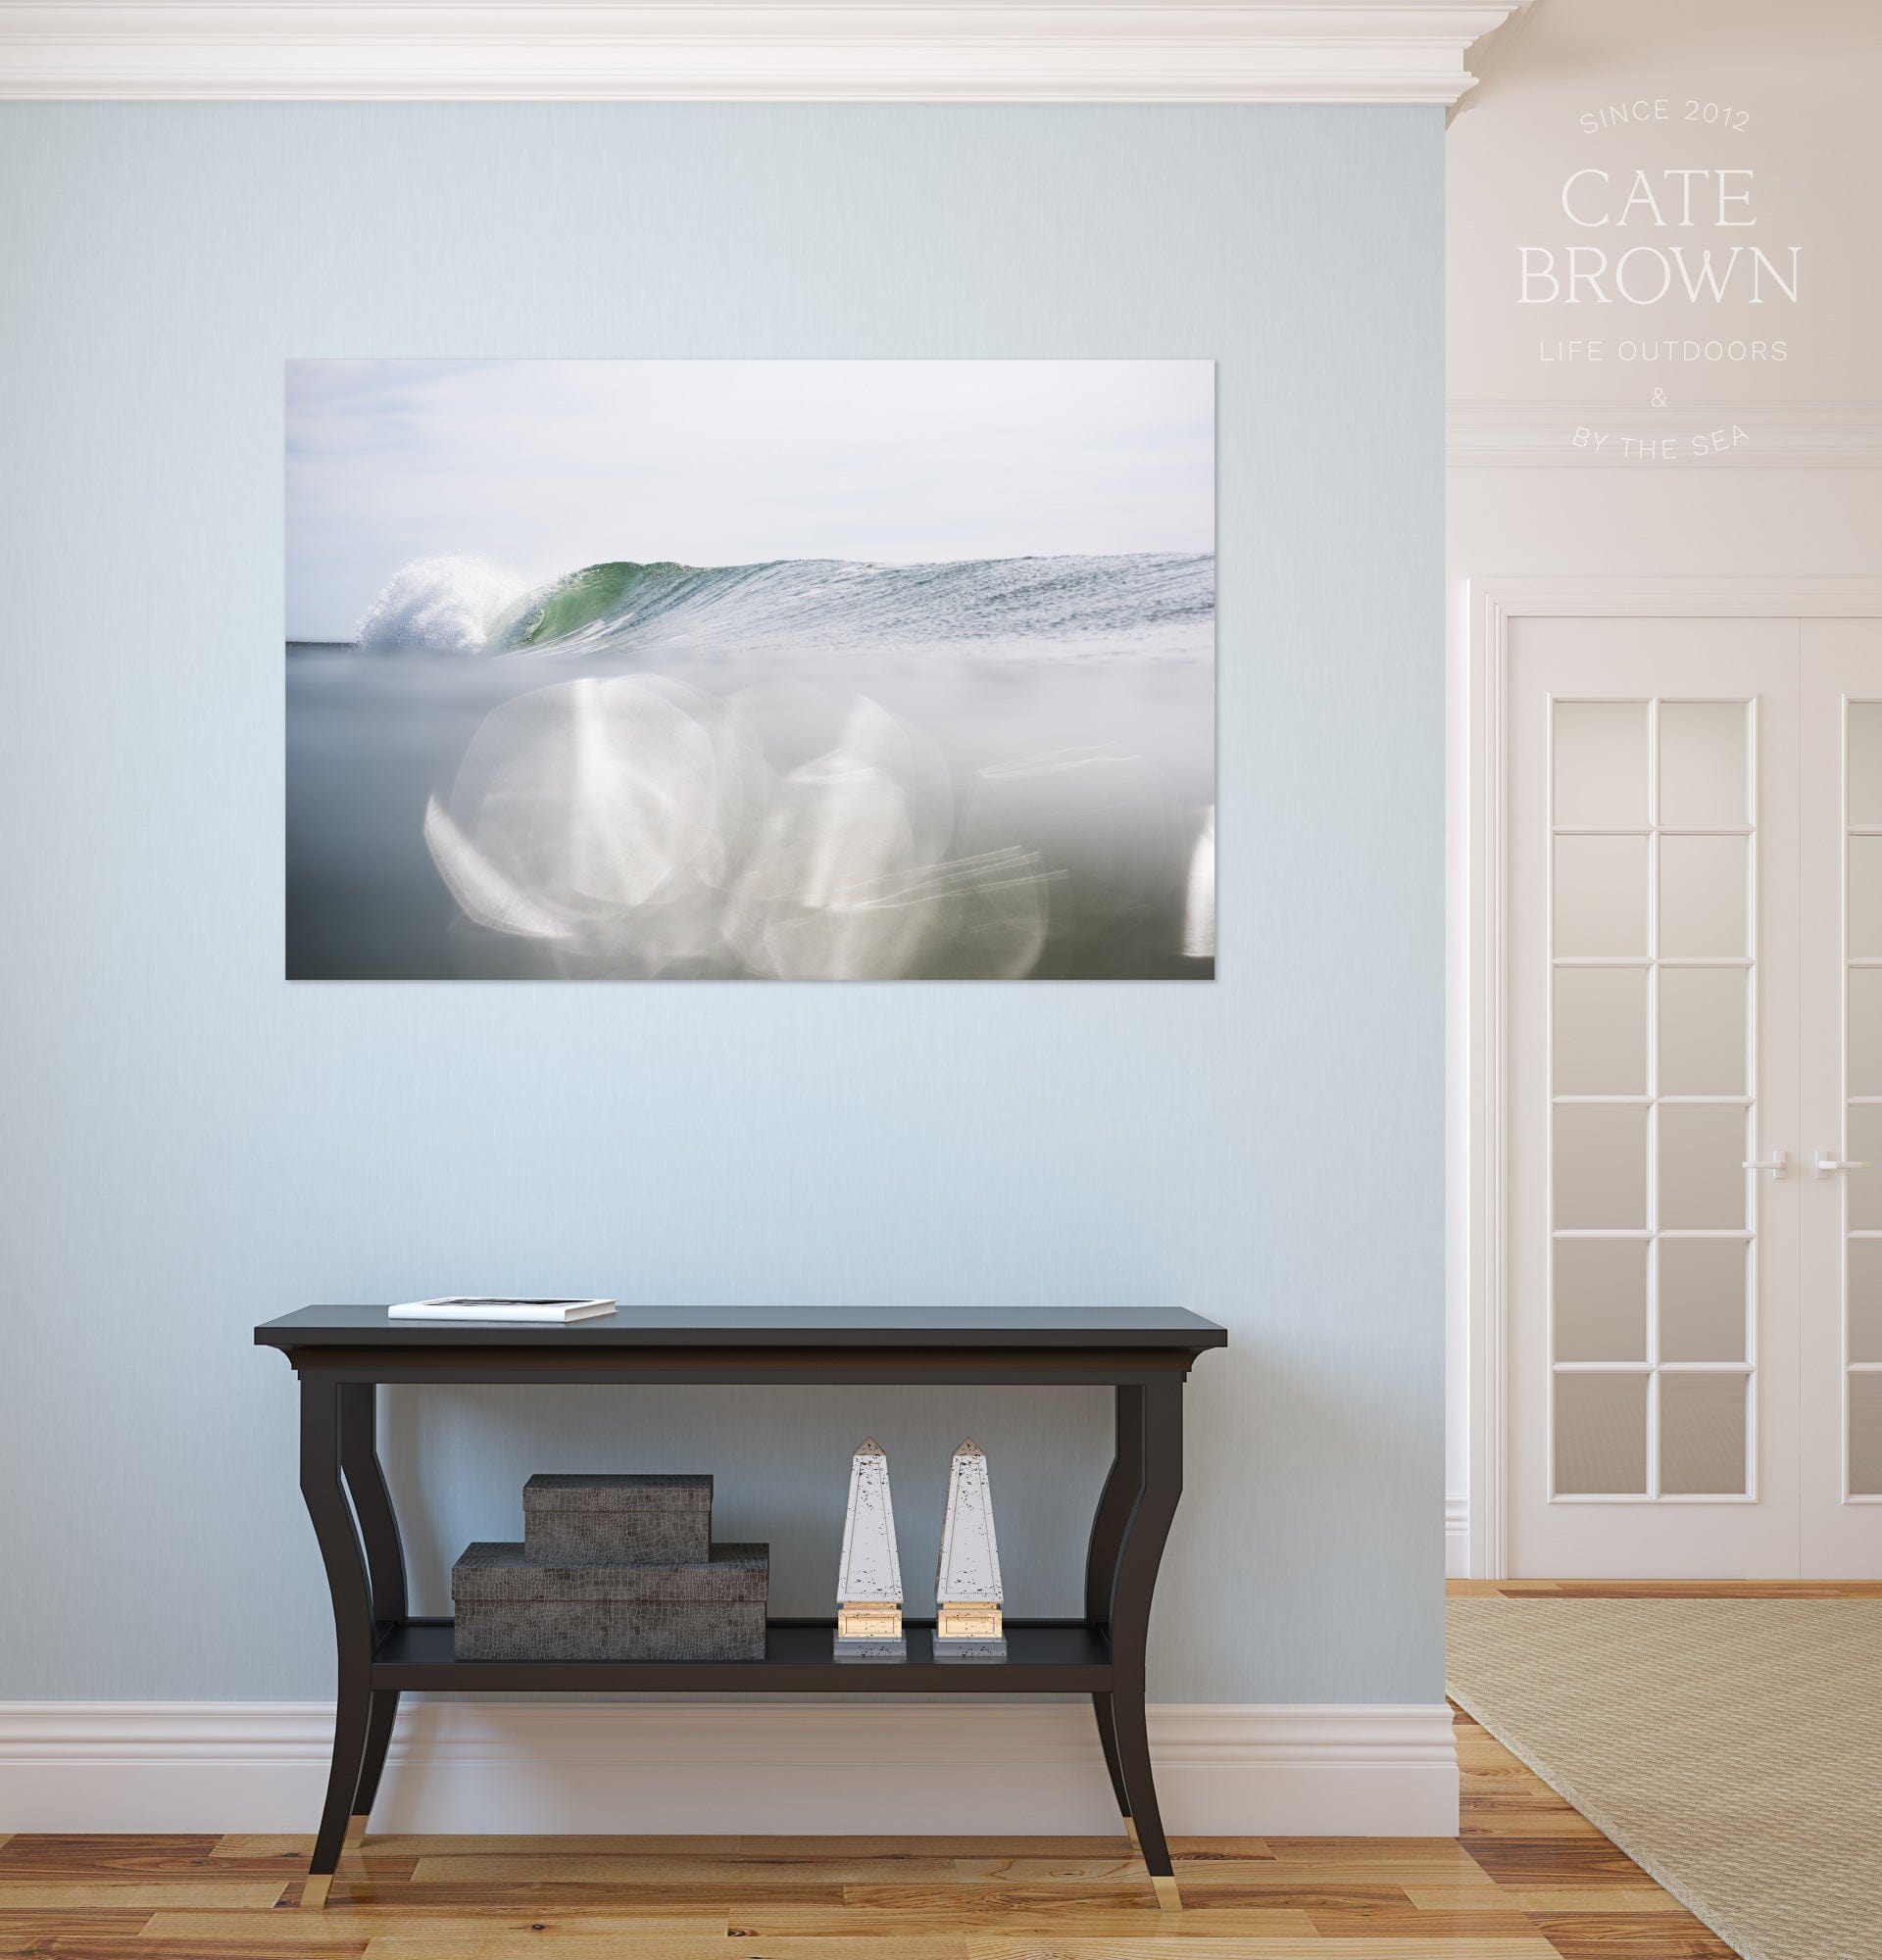 Cate Brown Photo Canvas / 16"x24" / None (Print Only) Summer Waves in Green  //  Ocean Photography Made to Order Ocean Fine Art